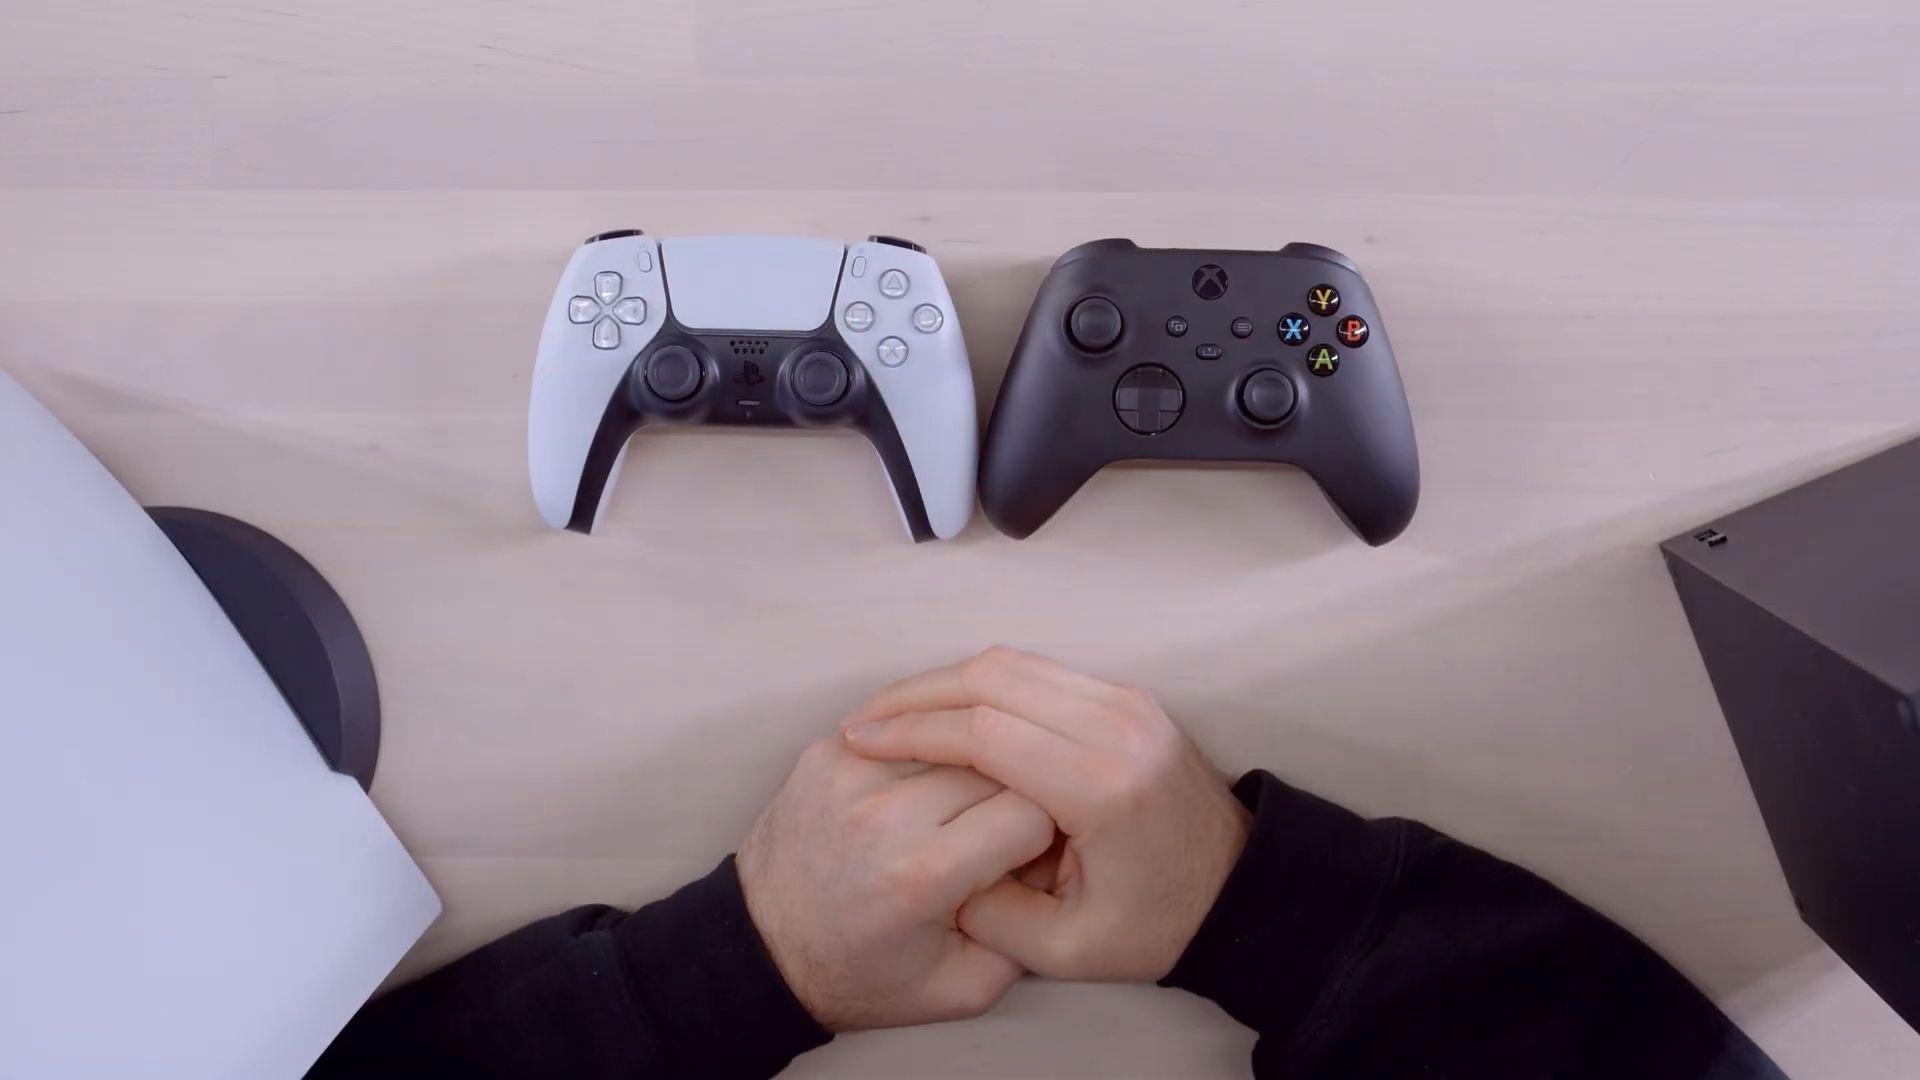 ps5 and xbox series controllers